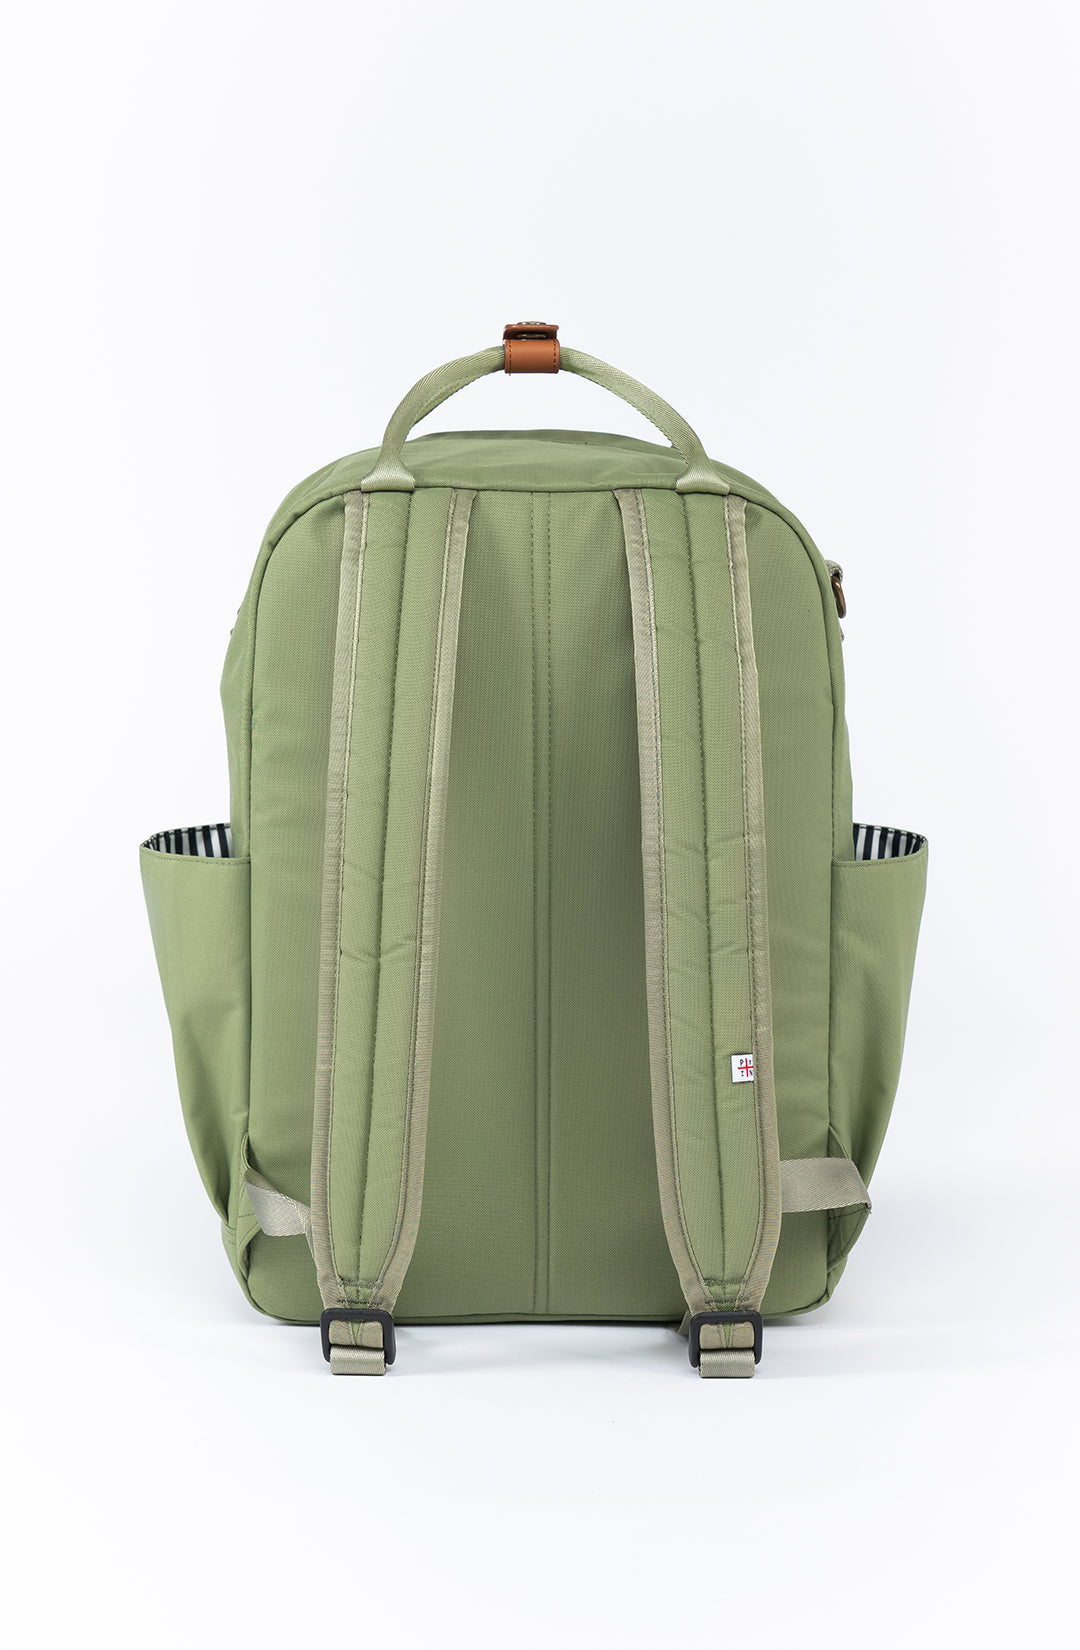 How to Pack Anello Backpack for Your Future Travels